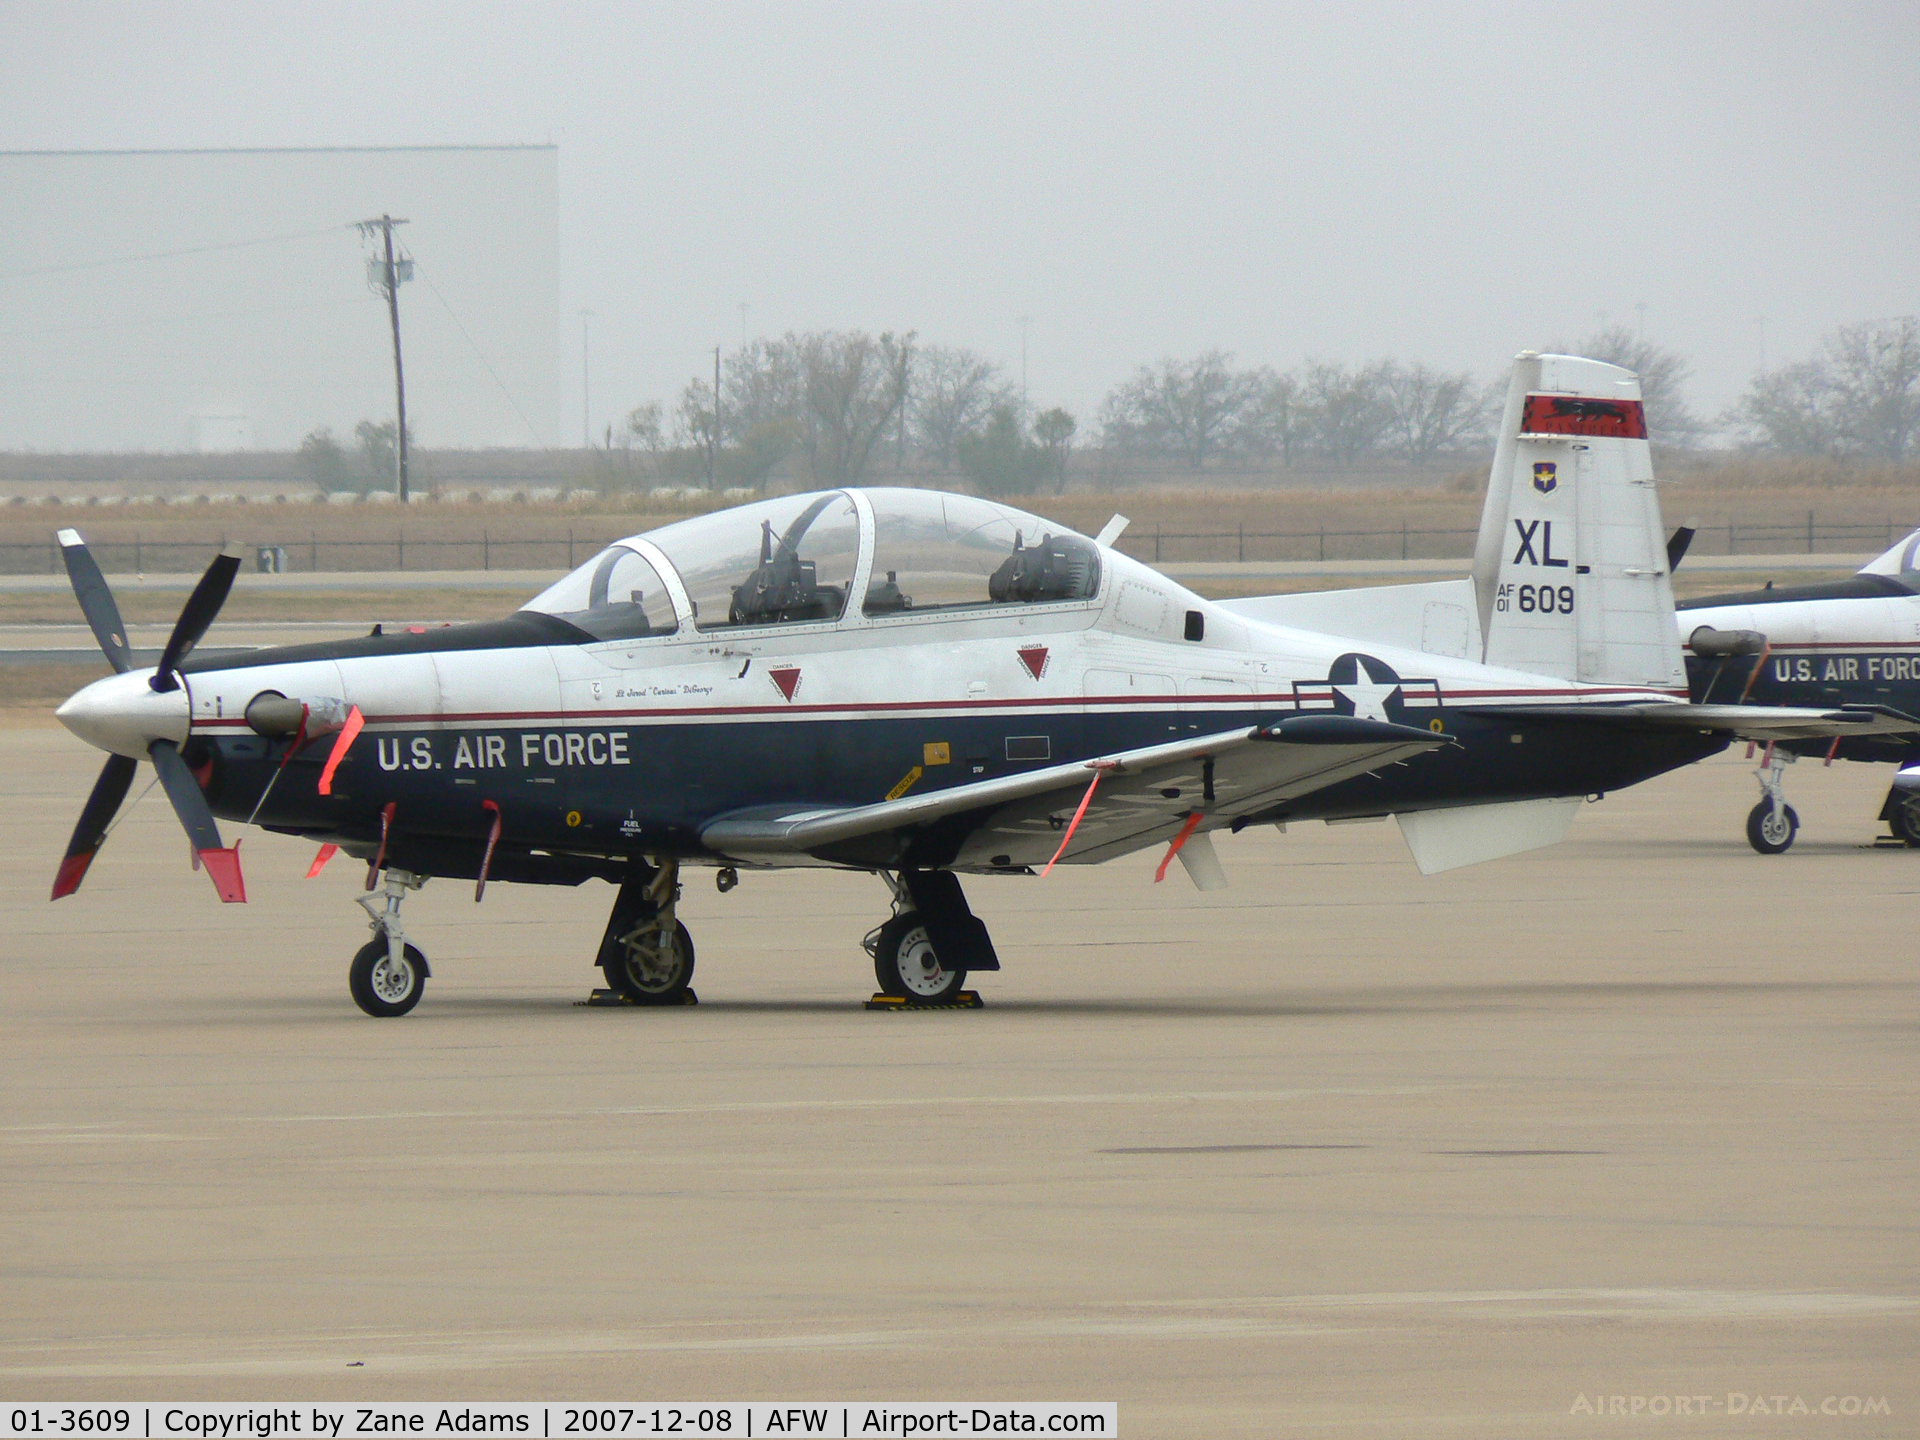 01-3609, 2001 Raytheon T-6A Texan II C/N PT-130, On the ramp at Alliance Ft. Worth - Tail shot only